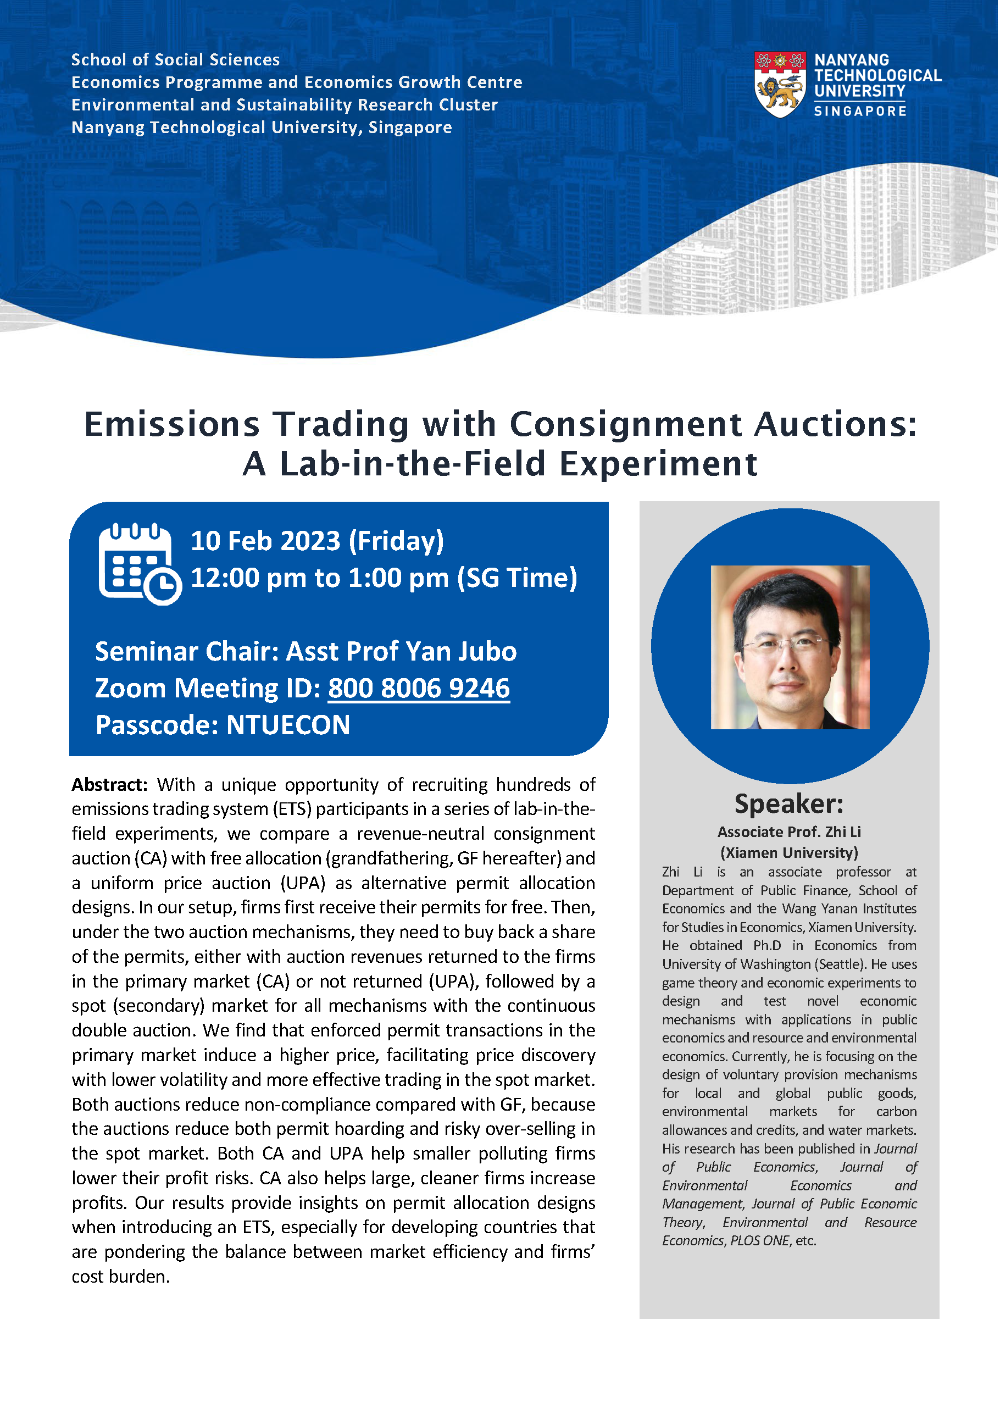 Emissions Trading, Consignment Auctions, Permit Transactions